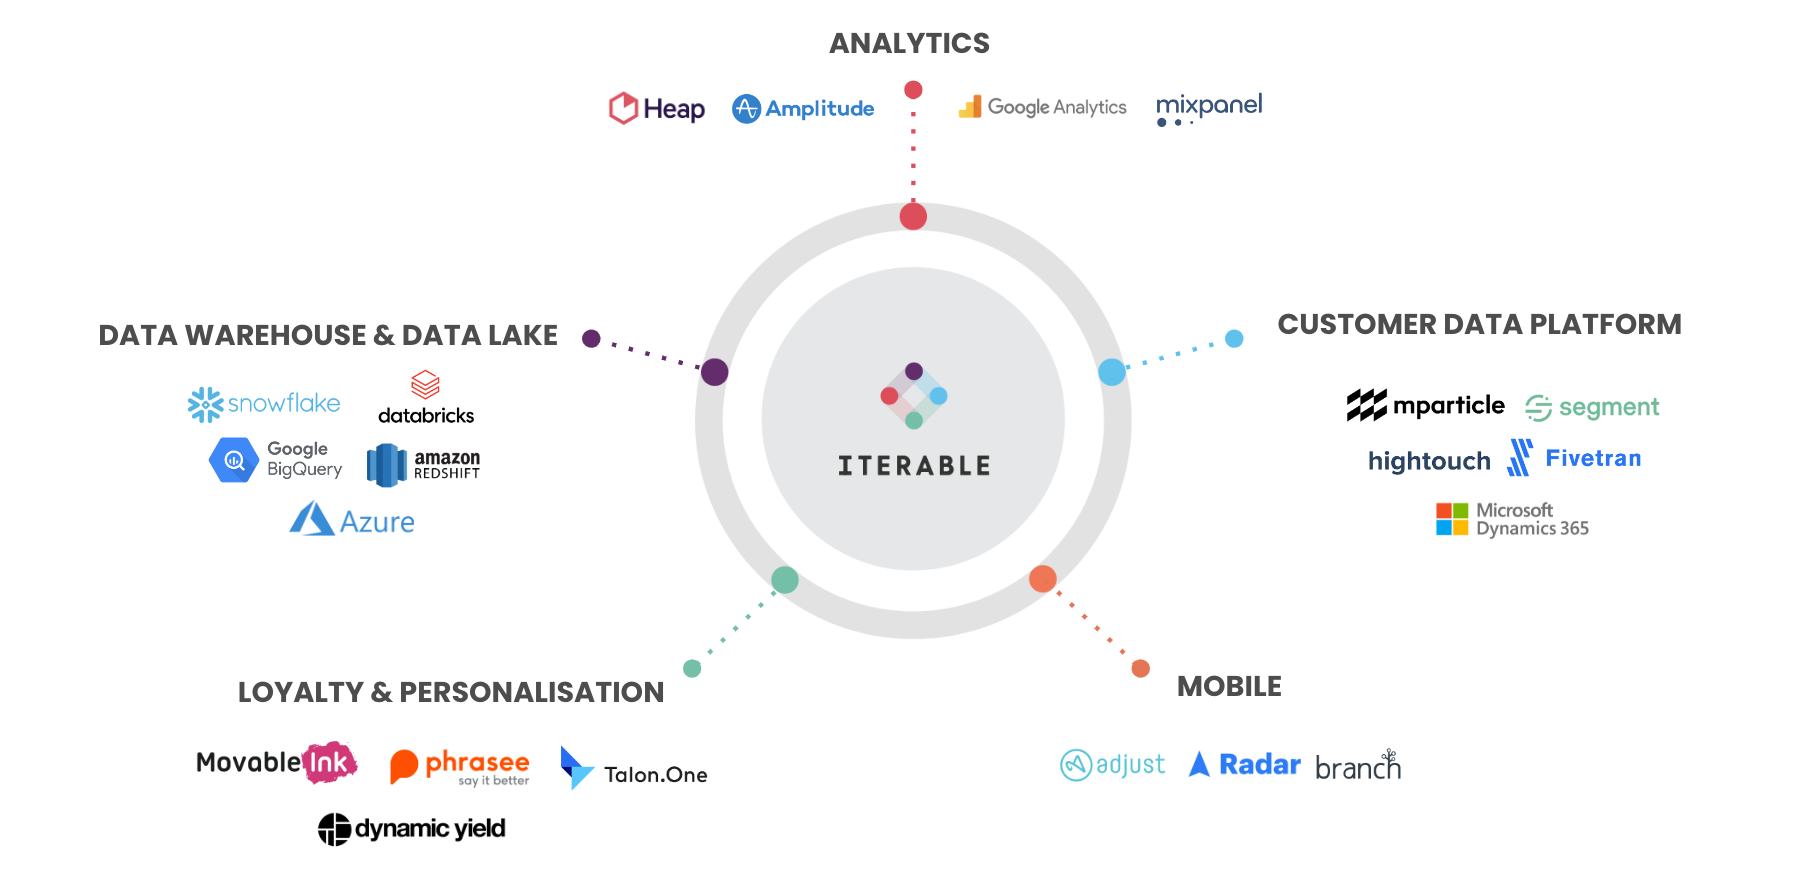 A hub and spoke model with Iterable in the center. Around the outside are: Analytics, Customer Data Platform, Mobile, Loyalty & Personalisation, and Data Warehouse & data Lake